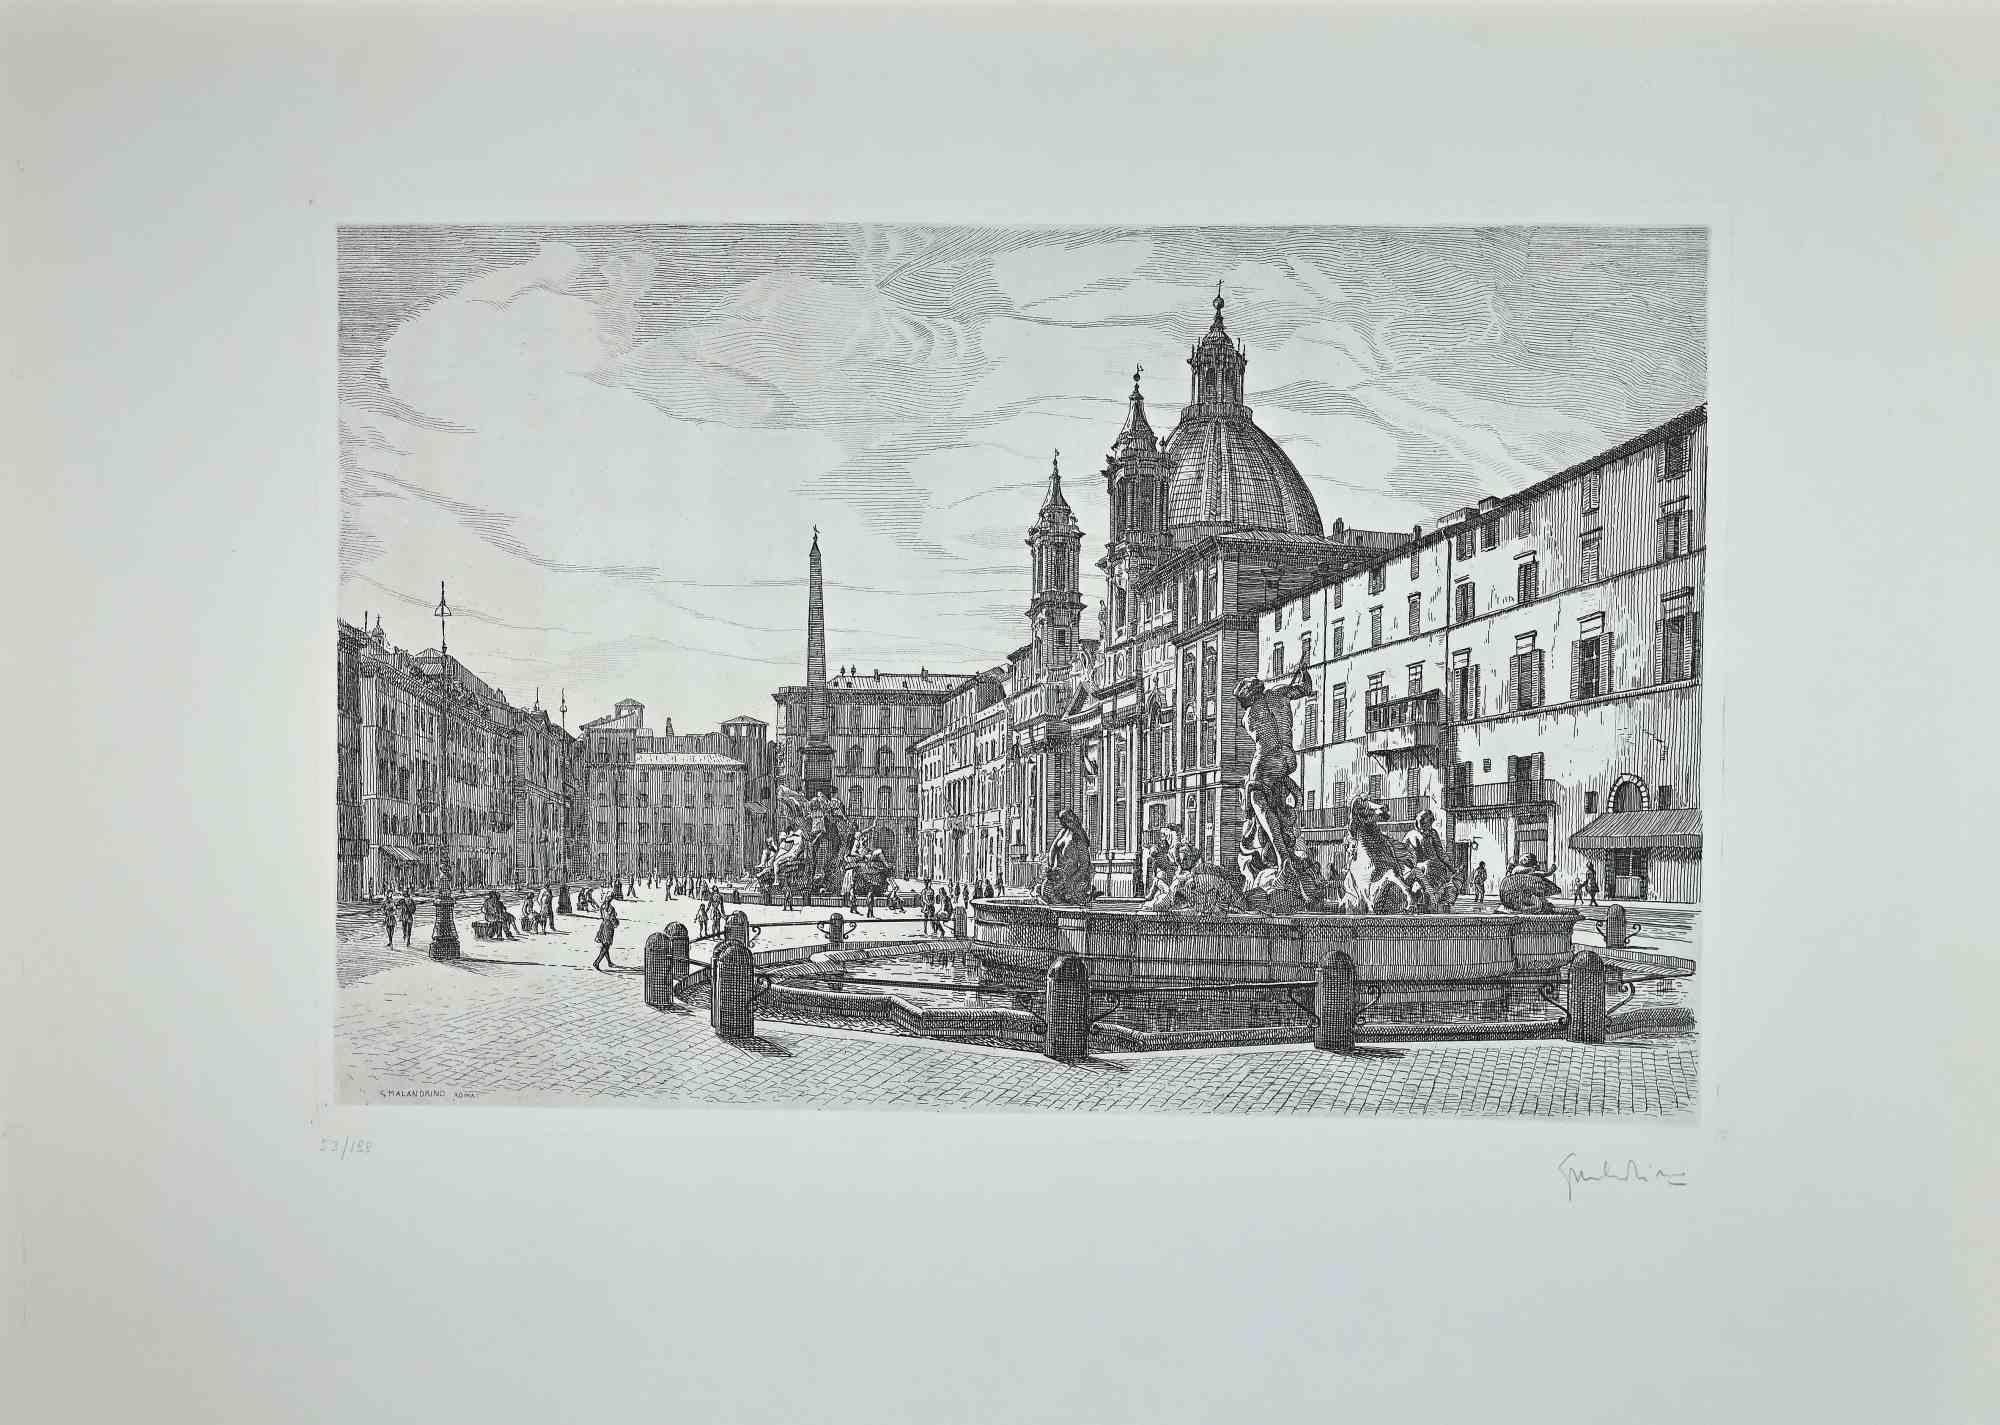 View of Piazza Navona  is an original contemporary artwork realized in 1970 by the Italian artist  Giuseppe Malandrino  (Modica, 1910 - Rome, 1979).
 
Etching on cardboard.
 
Hand-signed in pencil on the lower right corner.  Numbered on the